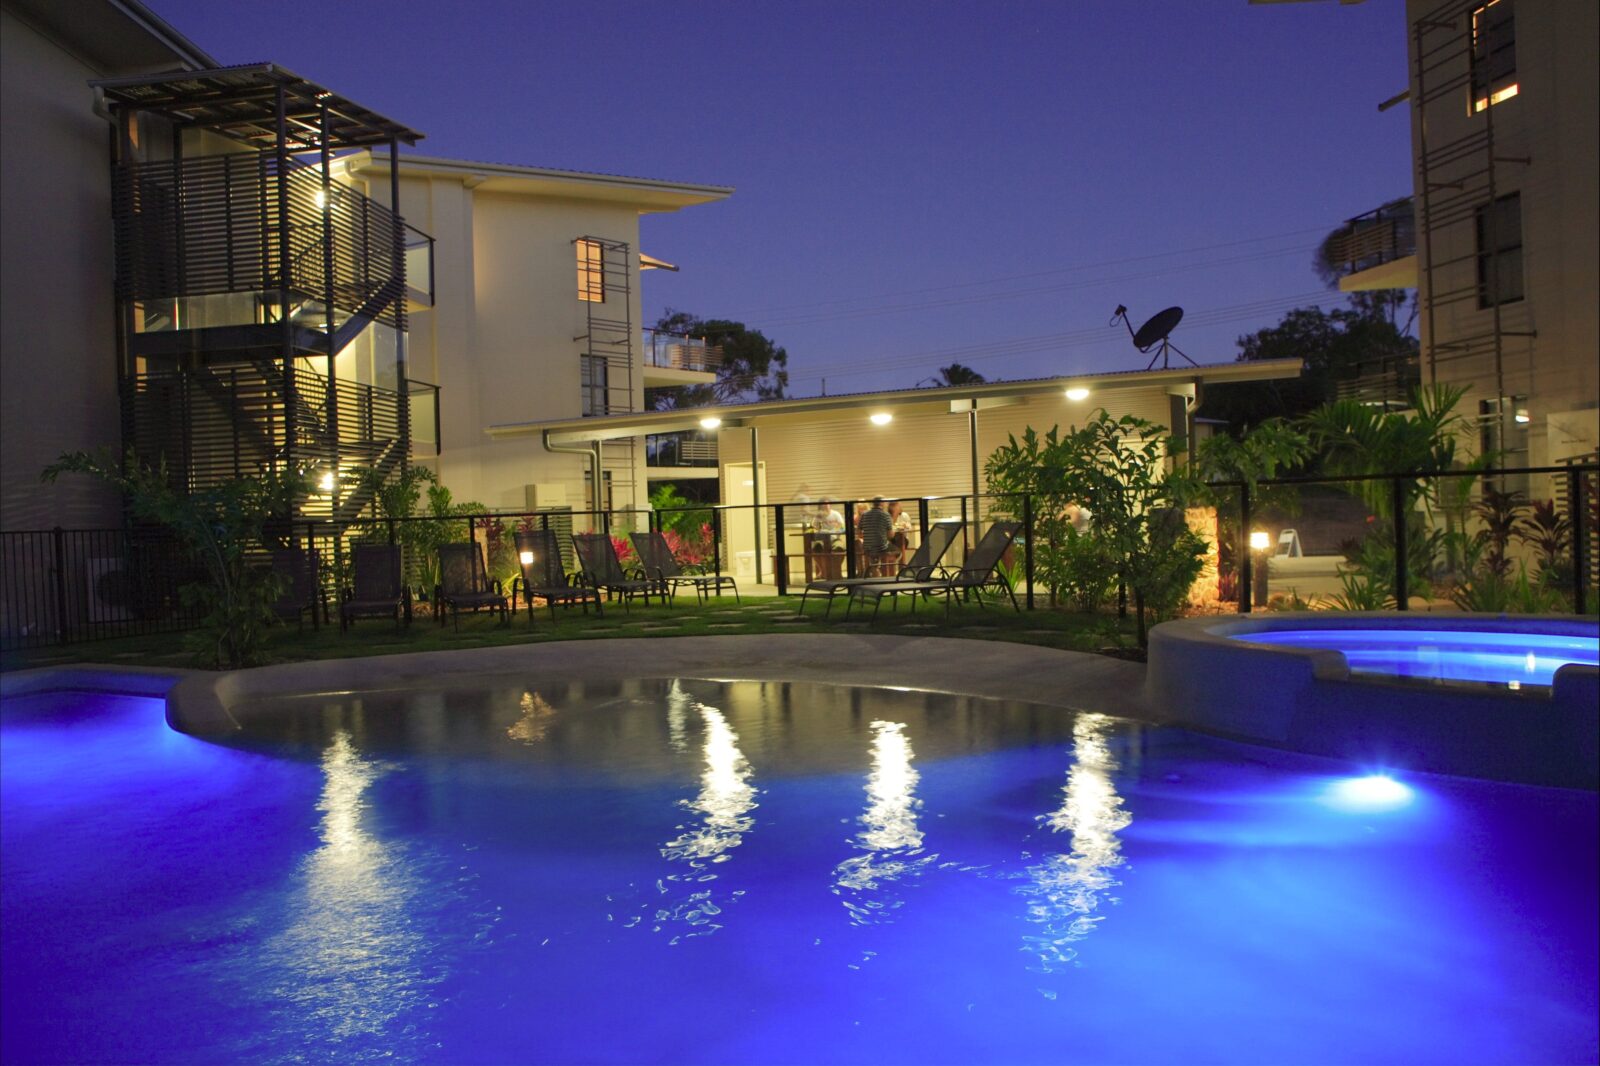 Enticing pool in the evening, relax & enjoy a BBQ and look at the night lights